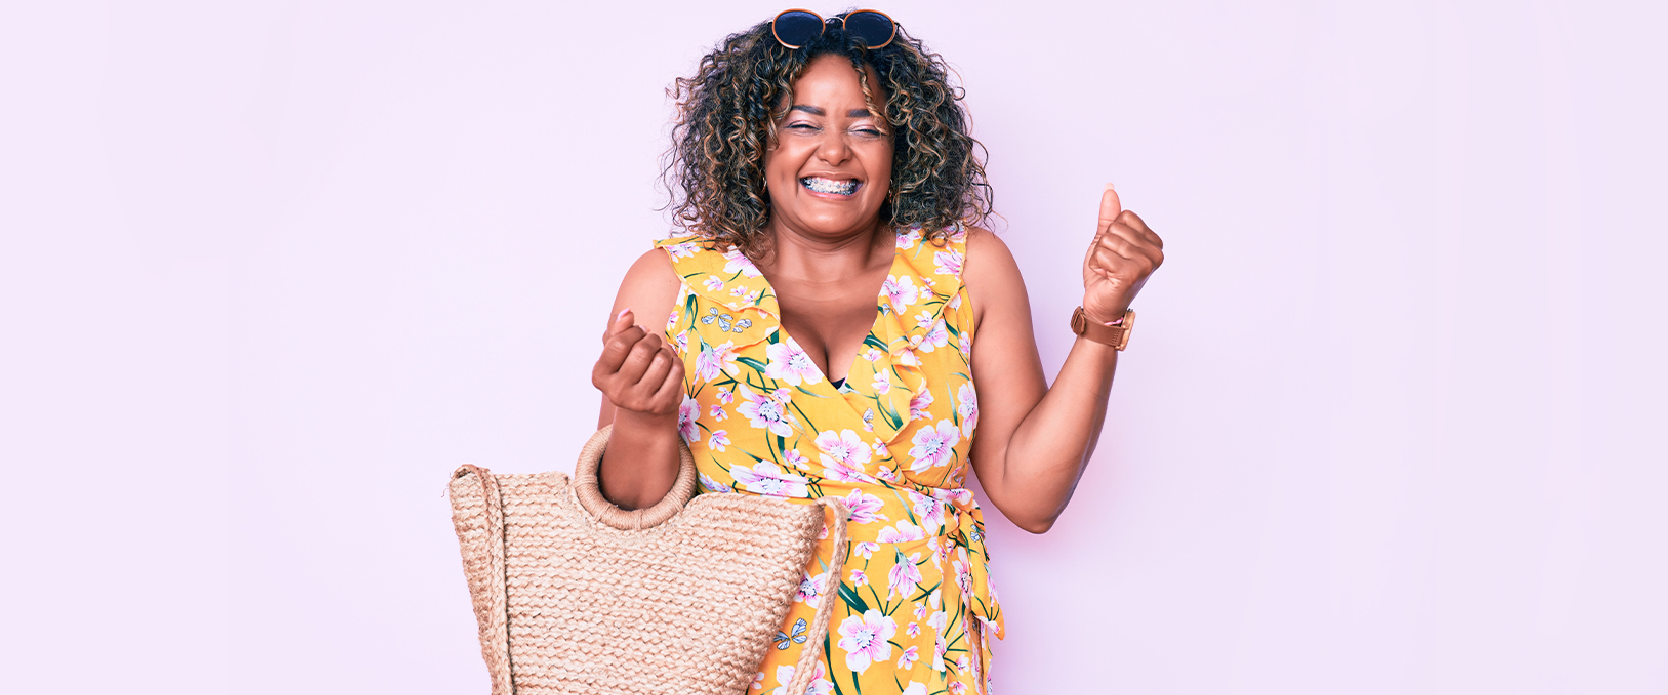 The welcome to empowered expression image features and upbeat model of African American descent grinning of joy and clenching her fists in excitement. She is wearing a yellow midi dress that features blossoms all over it as a design.